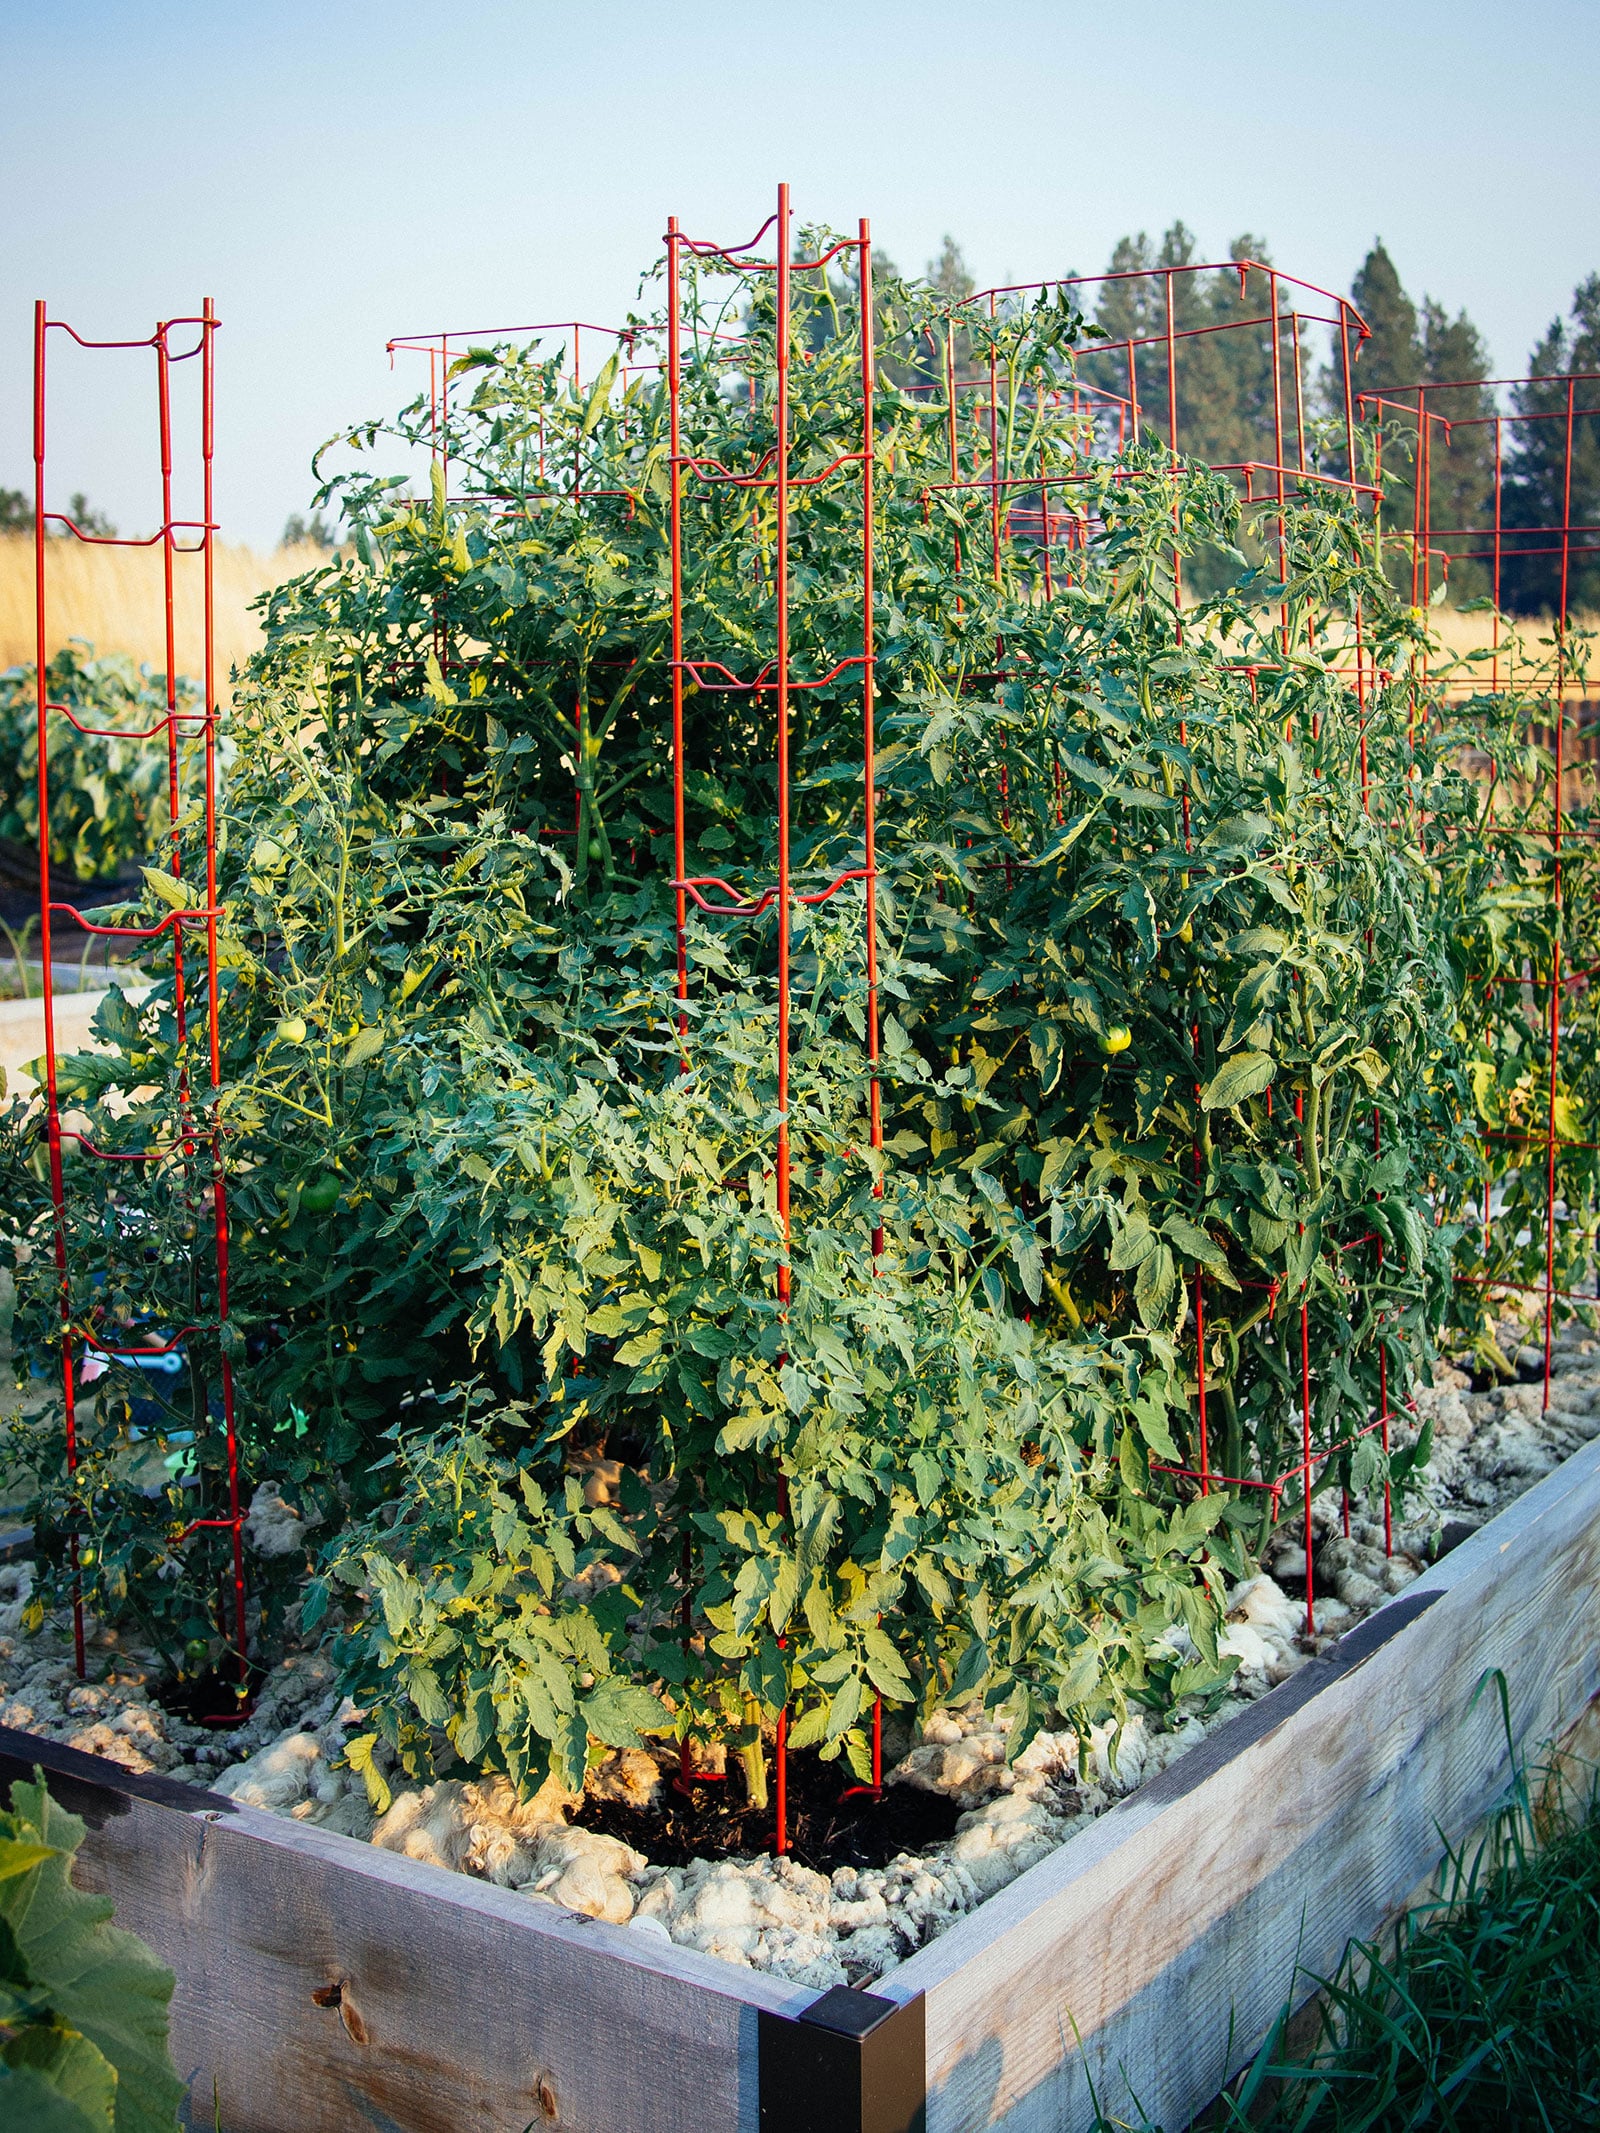 Raised garden bed with several large tomato plants growing up a red tomato trellis and inside square tomato cages